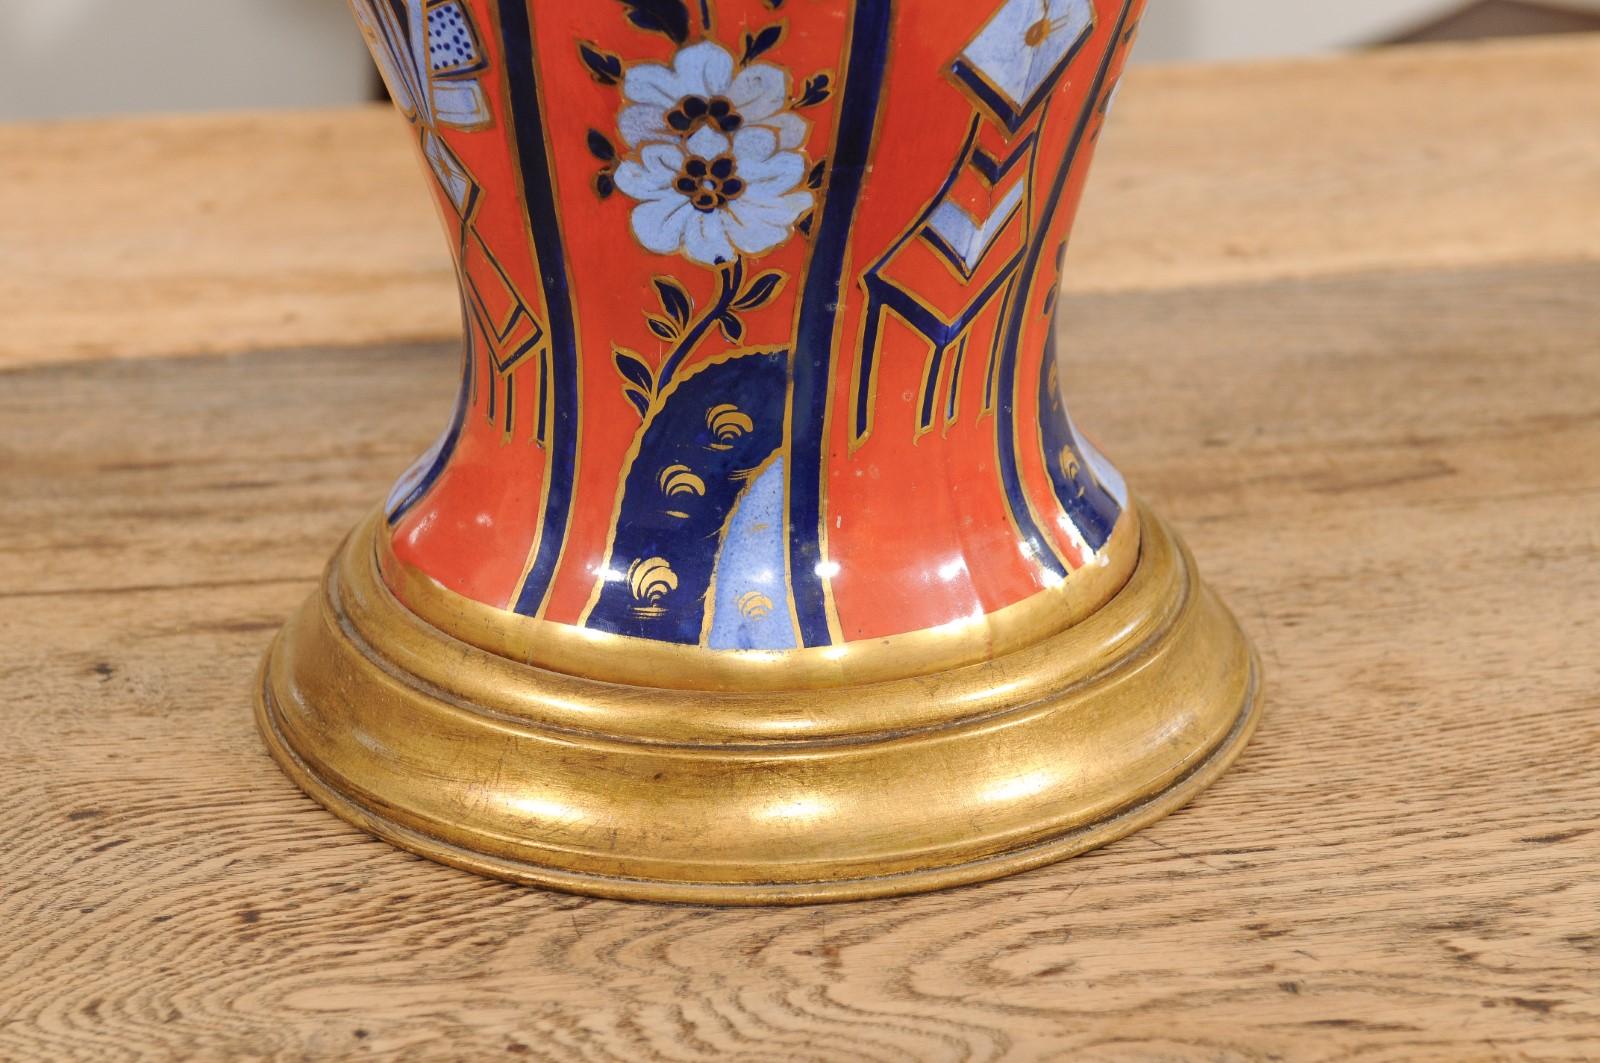 19th Century English Porcelain Vase in Orange & Blue, wired as a Lamp For Sale 5